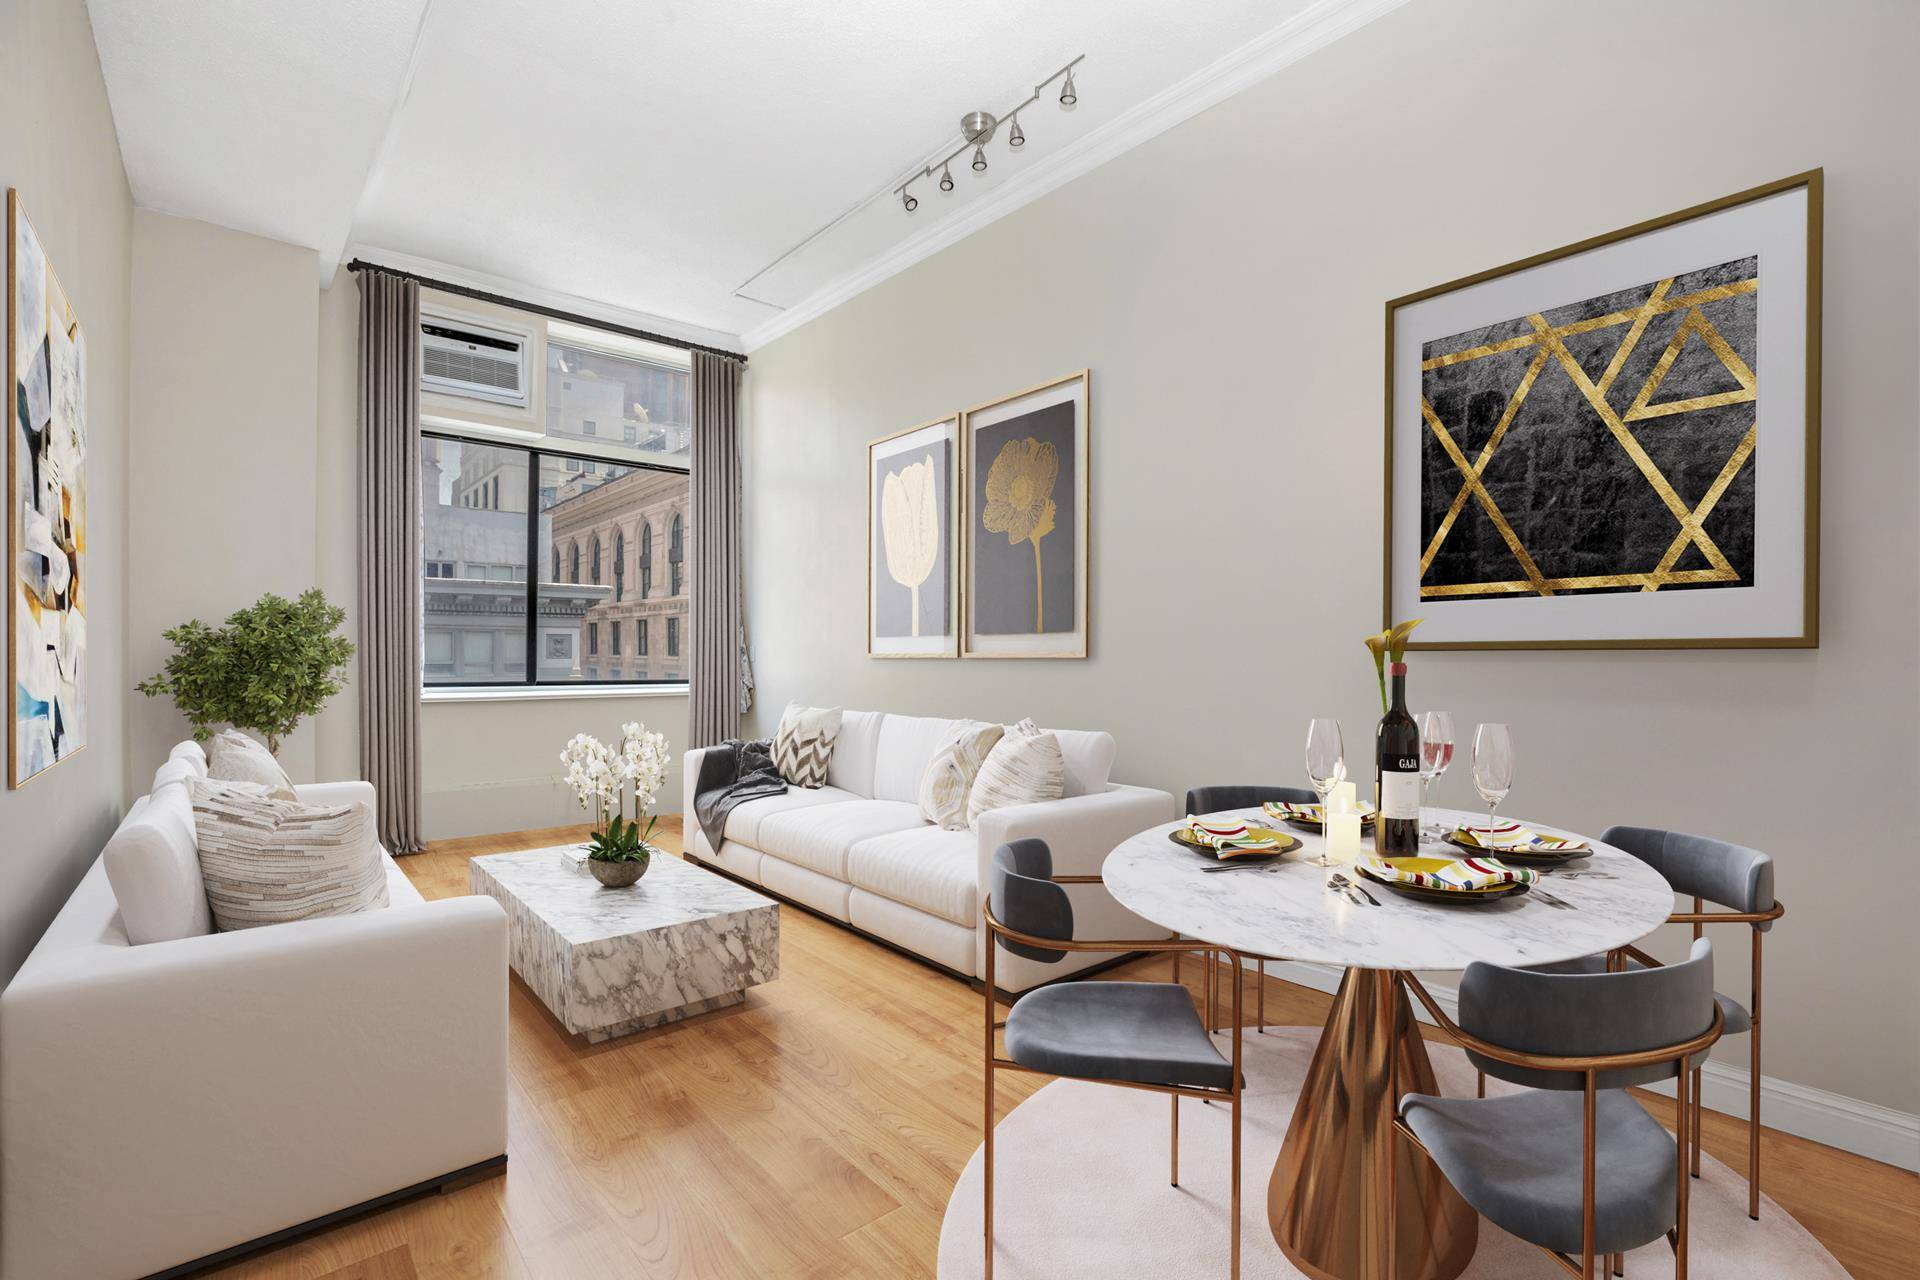 UNBEATABLE NEW PRICE ! BRING OFFERS FOR THIS RARE LOFT WITH 12 FOOT CEILINGS OVERLOOKING FIFTH AVENUE !